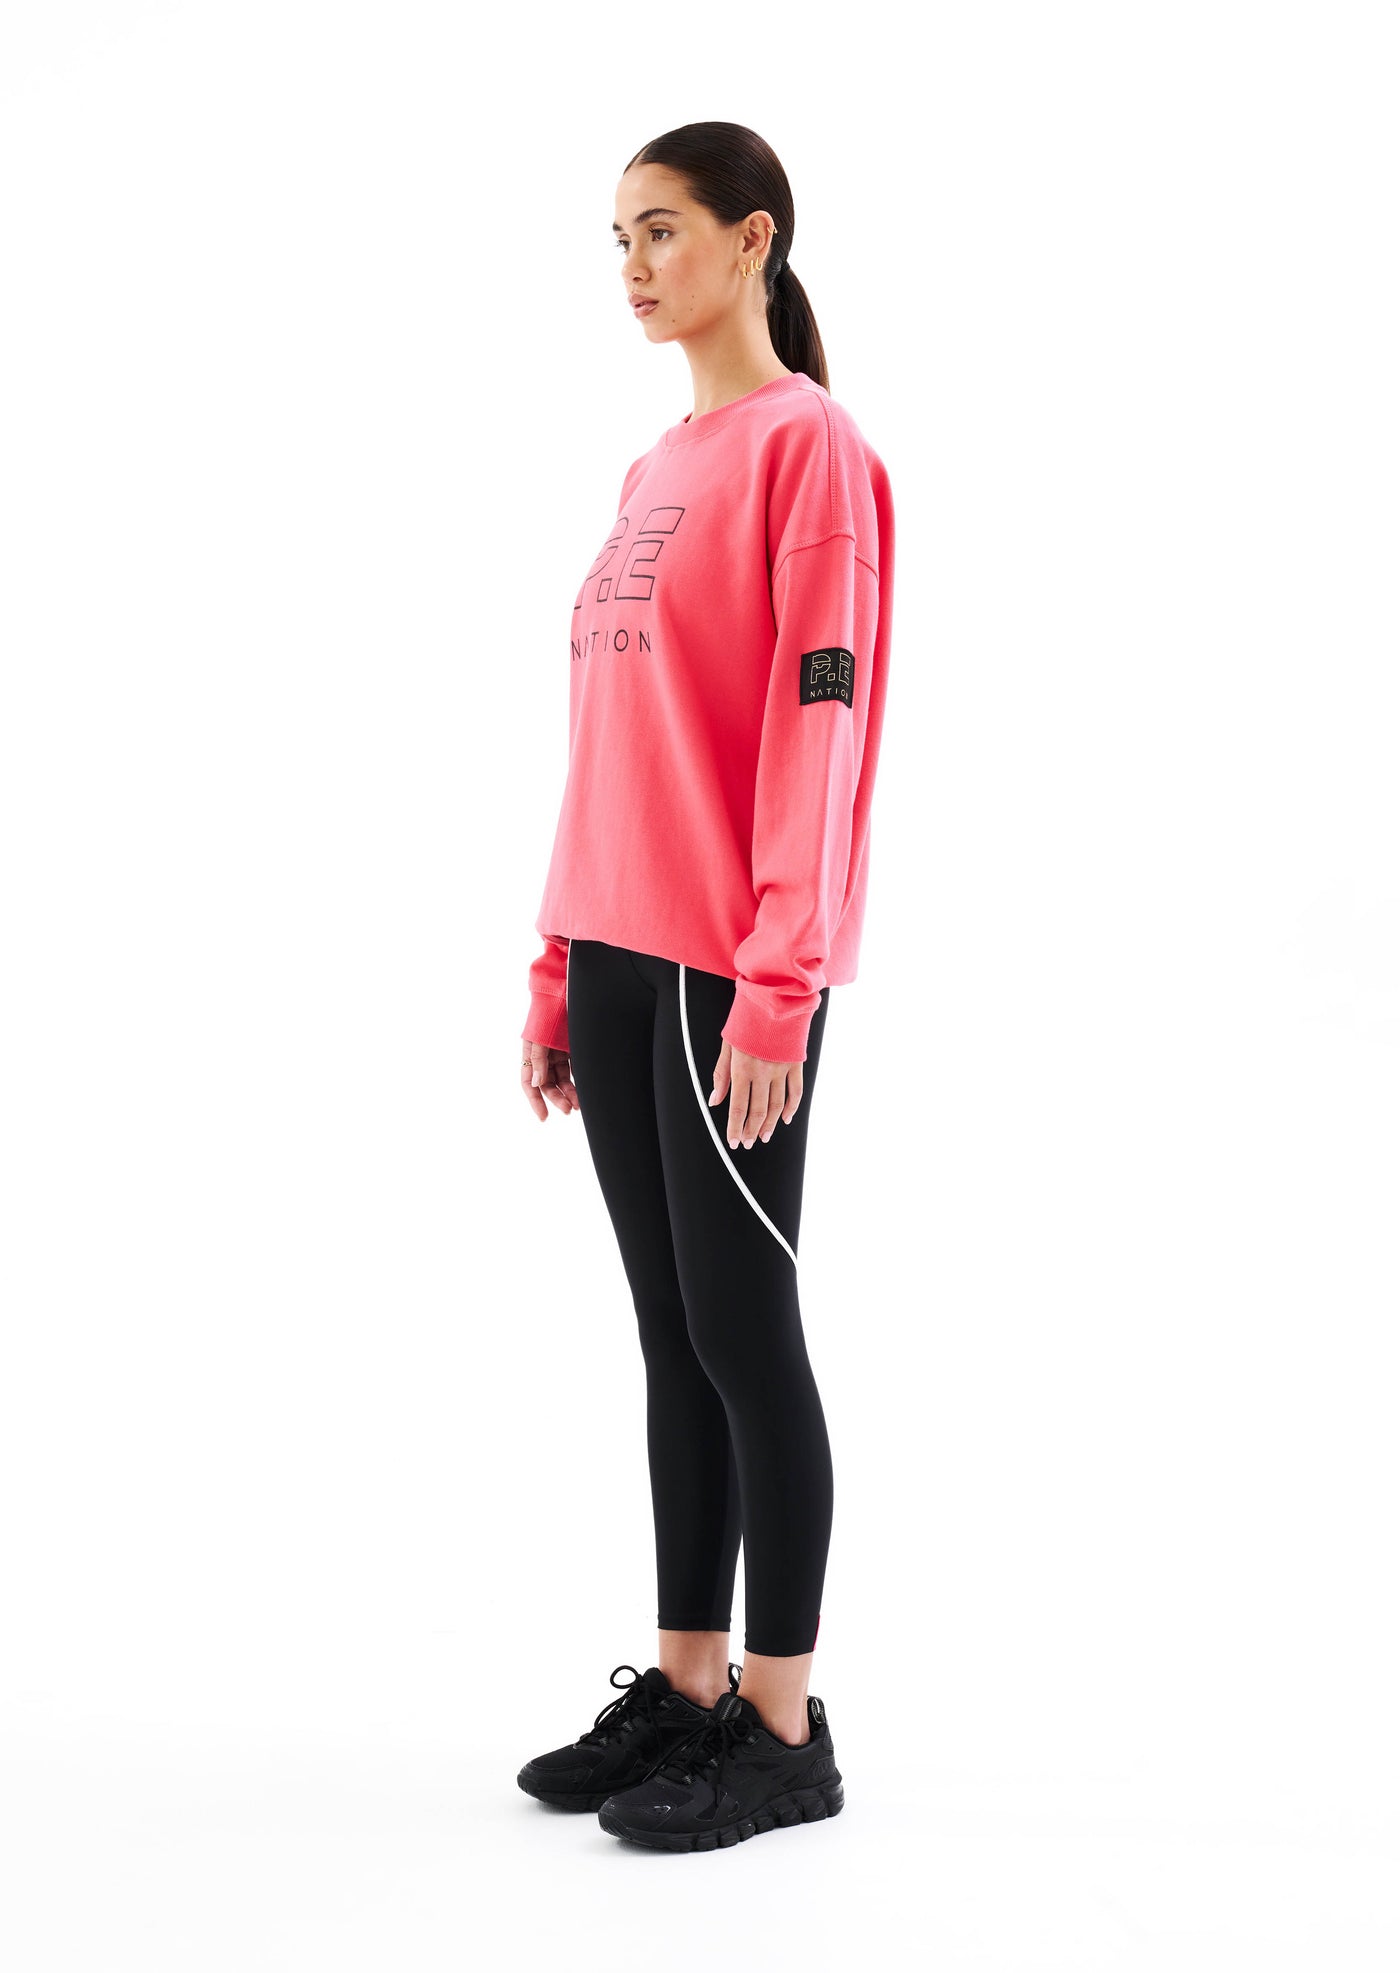 HEADS UP SWEAT IN DIVA PINK